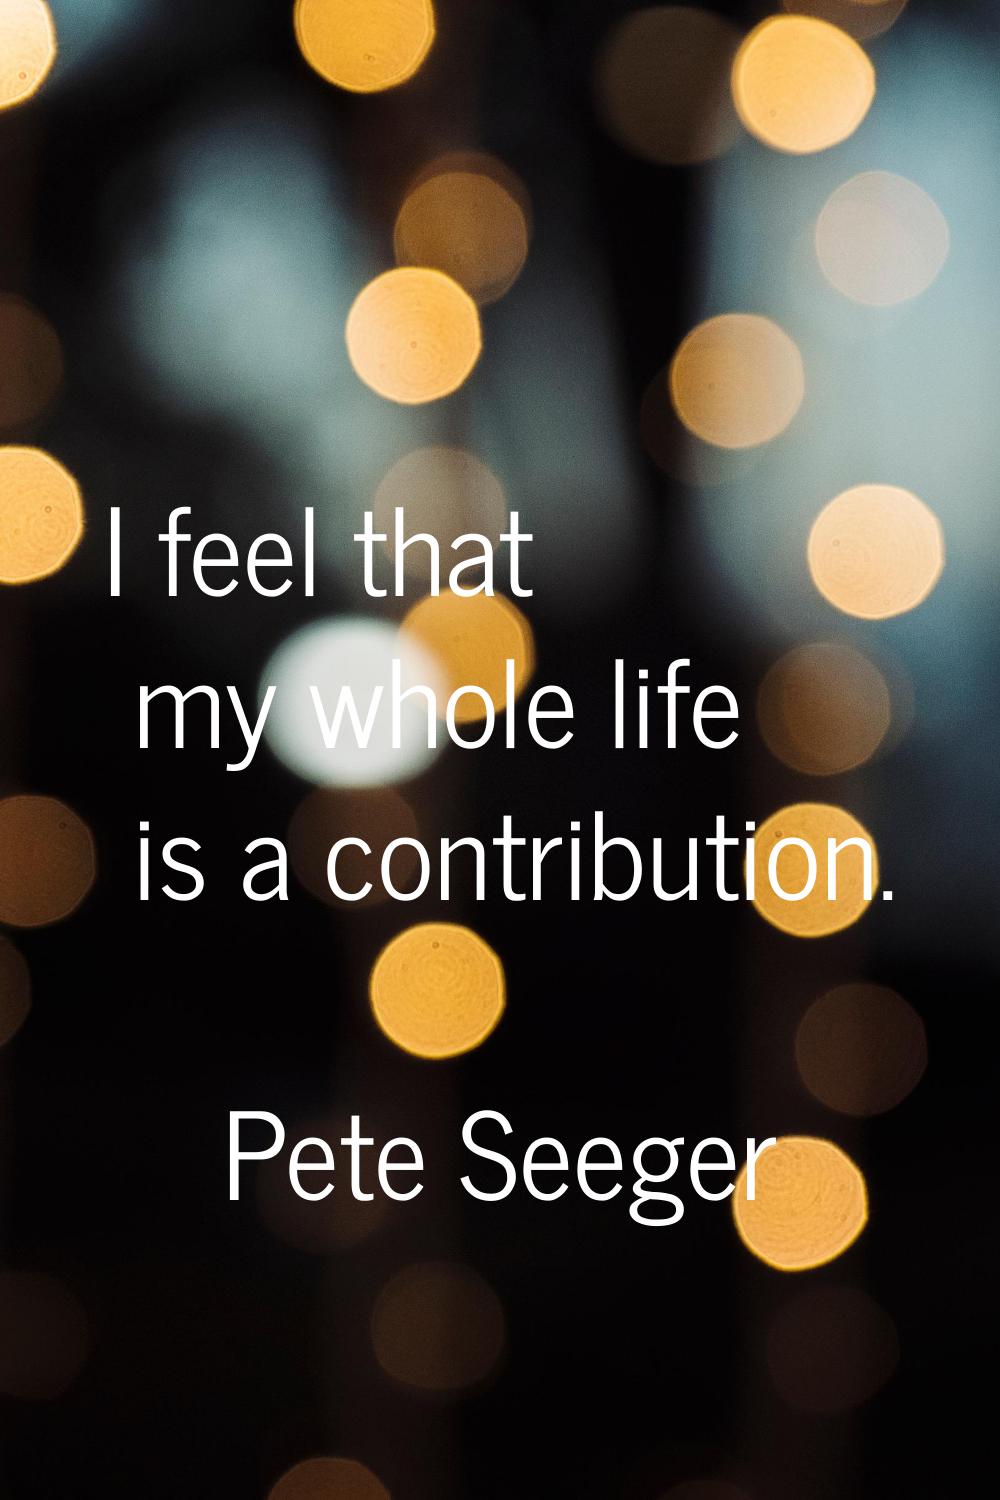 I feel that my whole life is a contribution.